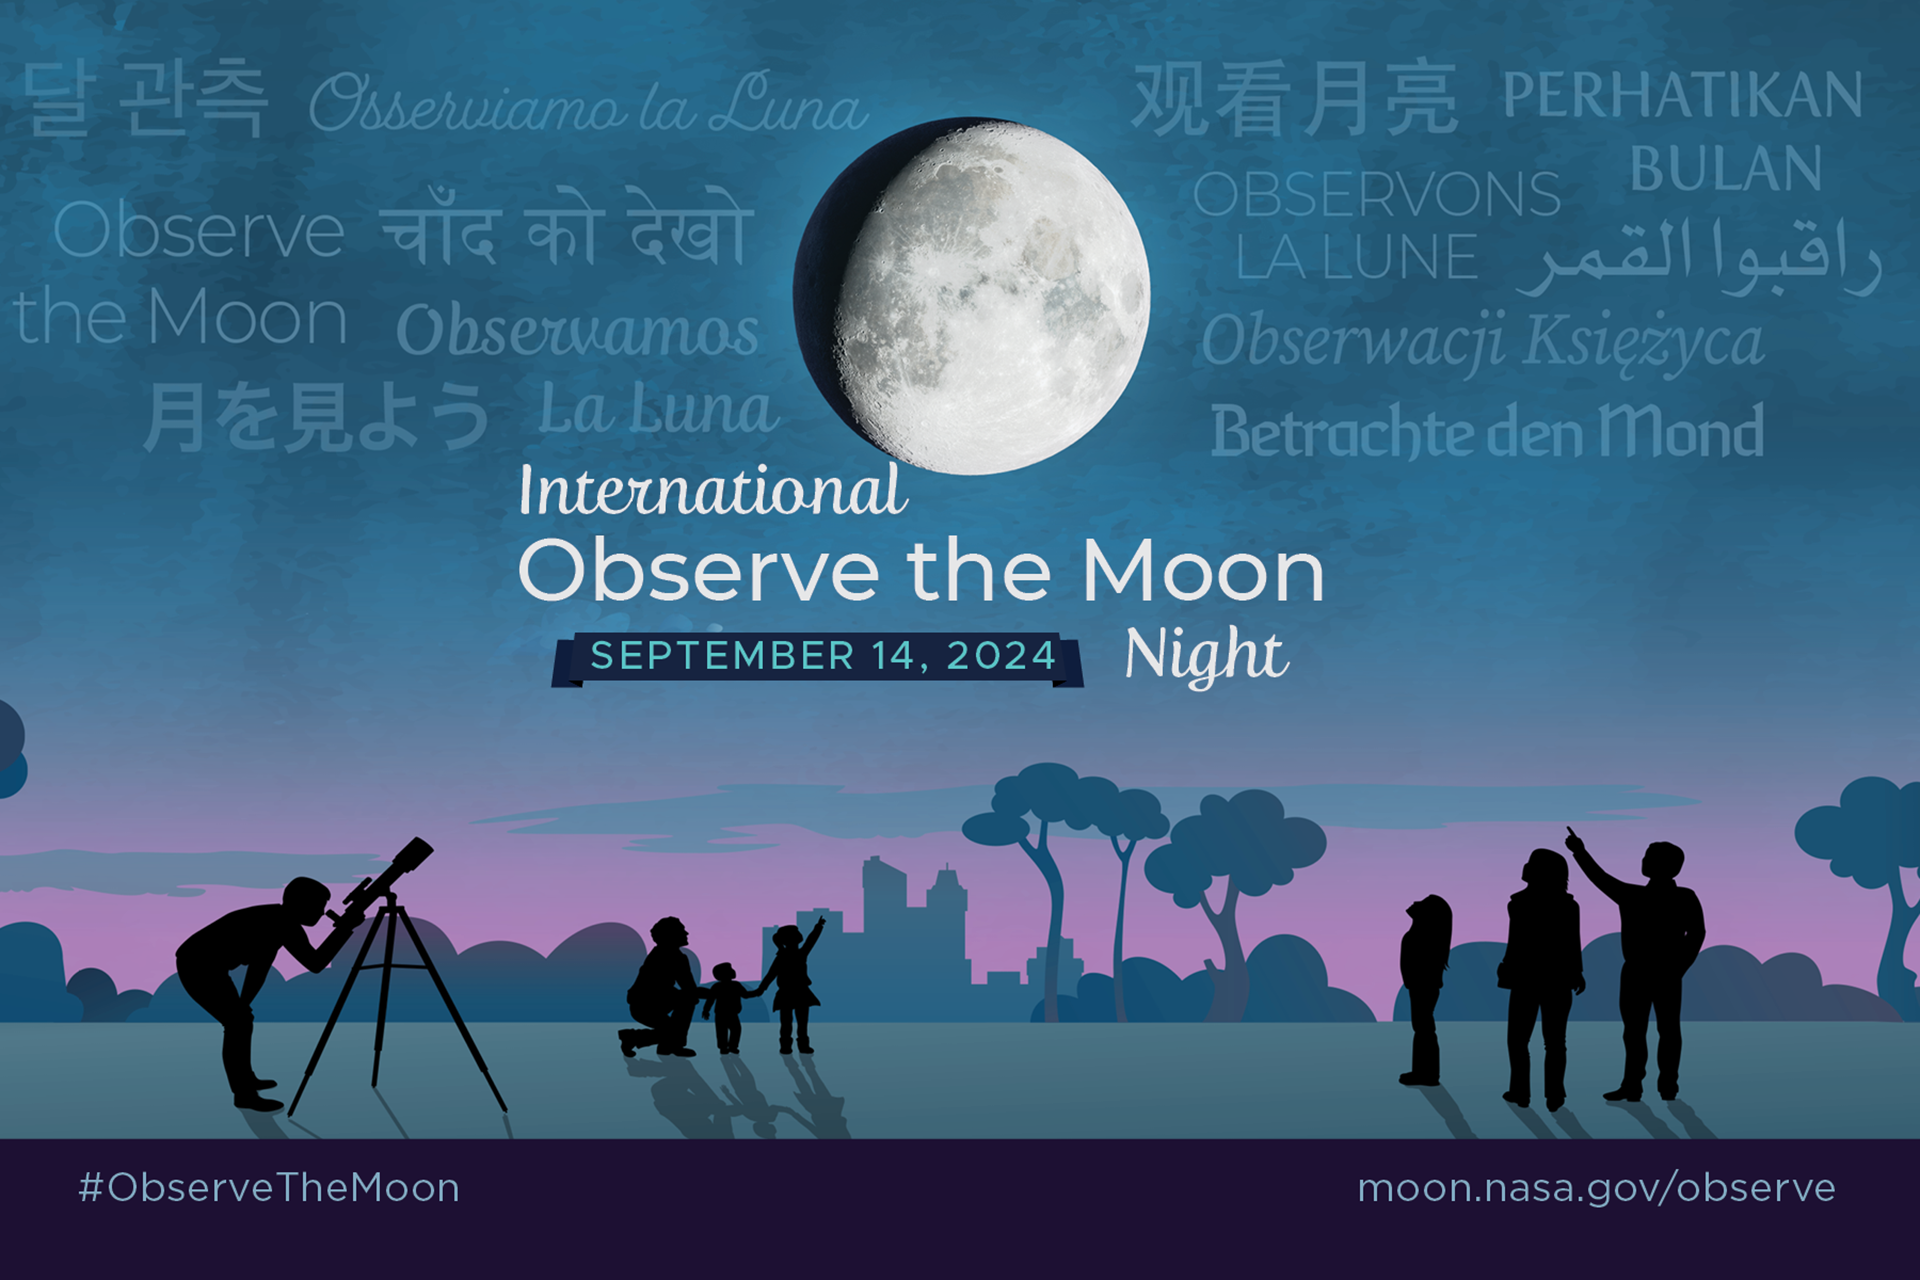 Save the Date card for International Observe the Moon Night, Sept. 14, 2024.